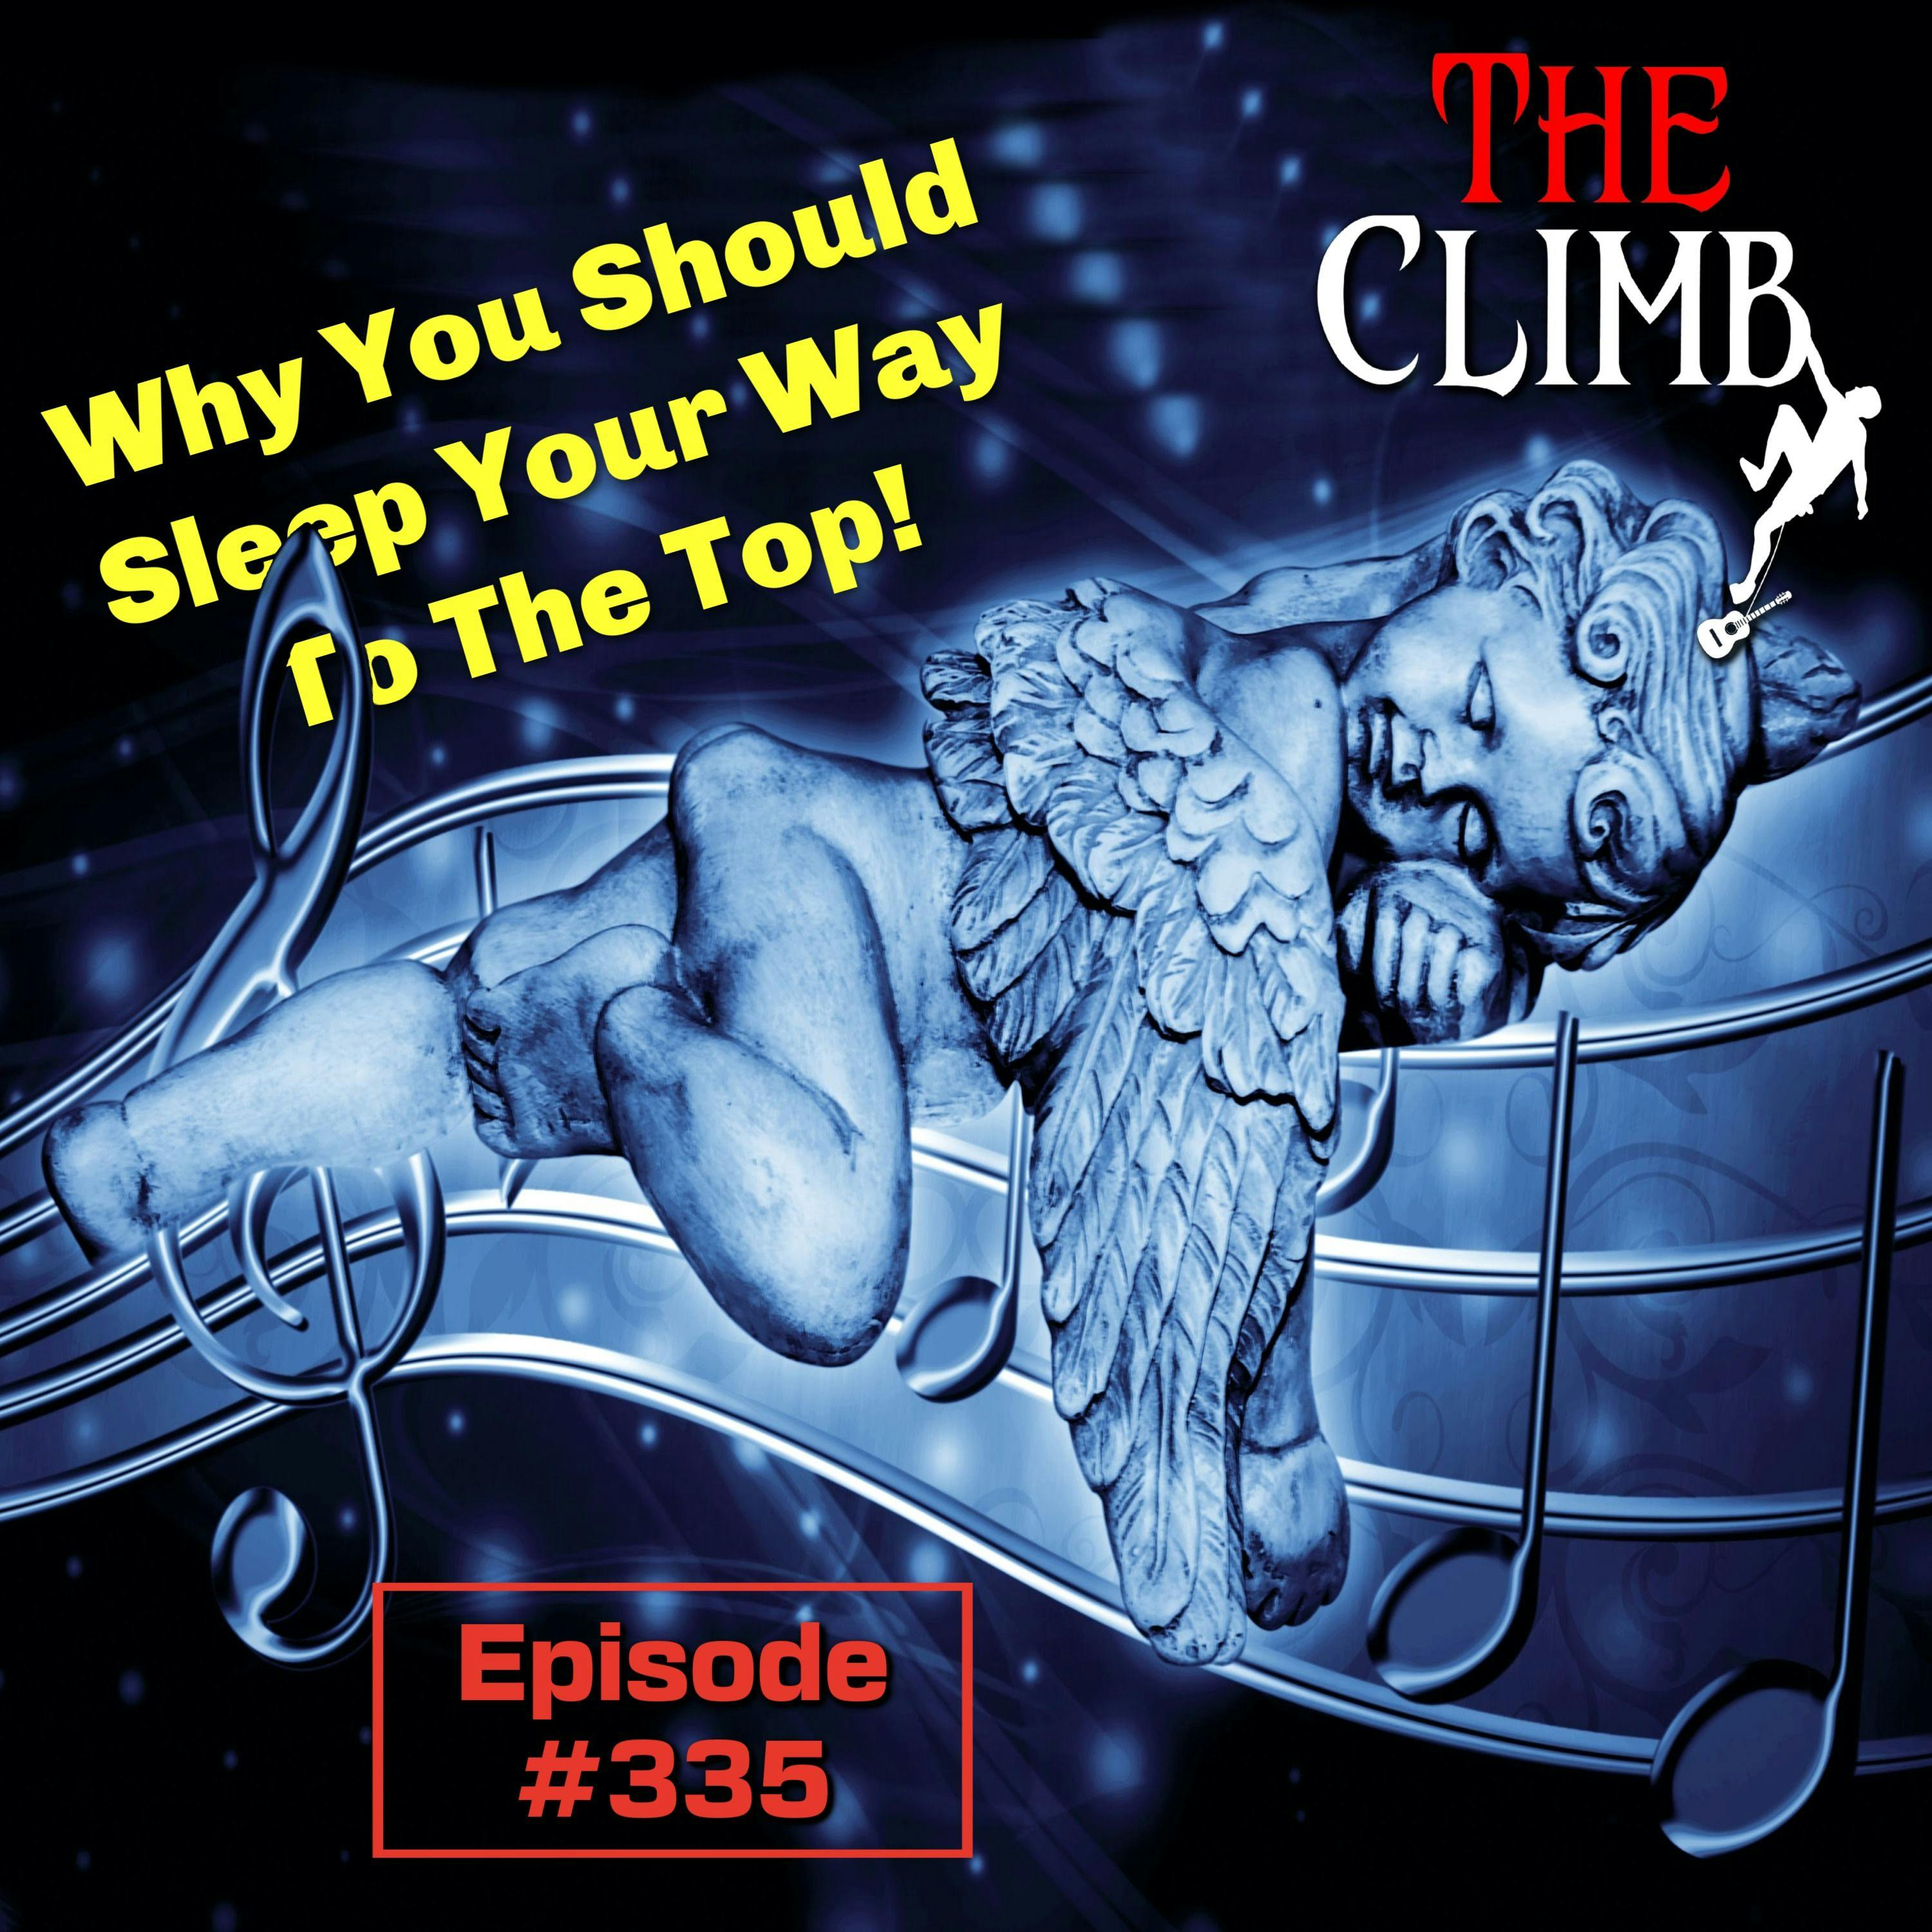 Ep 335: Why You Should Sleep Your Way To The Top